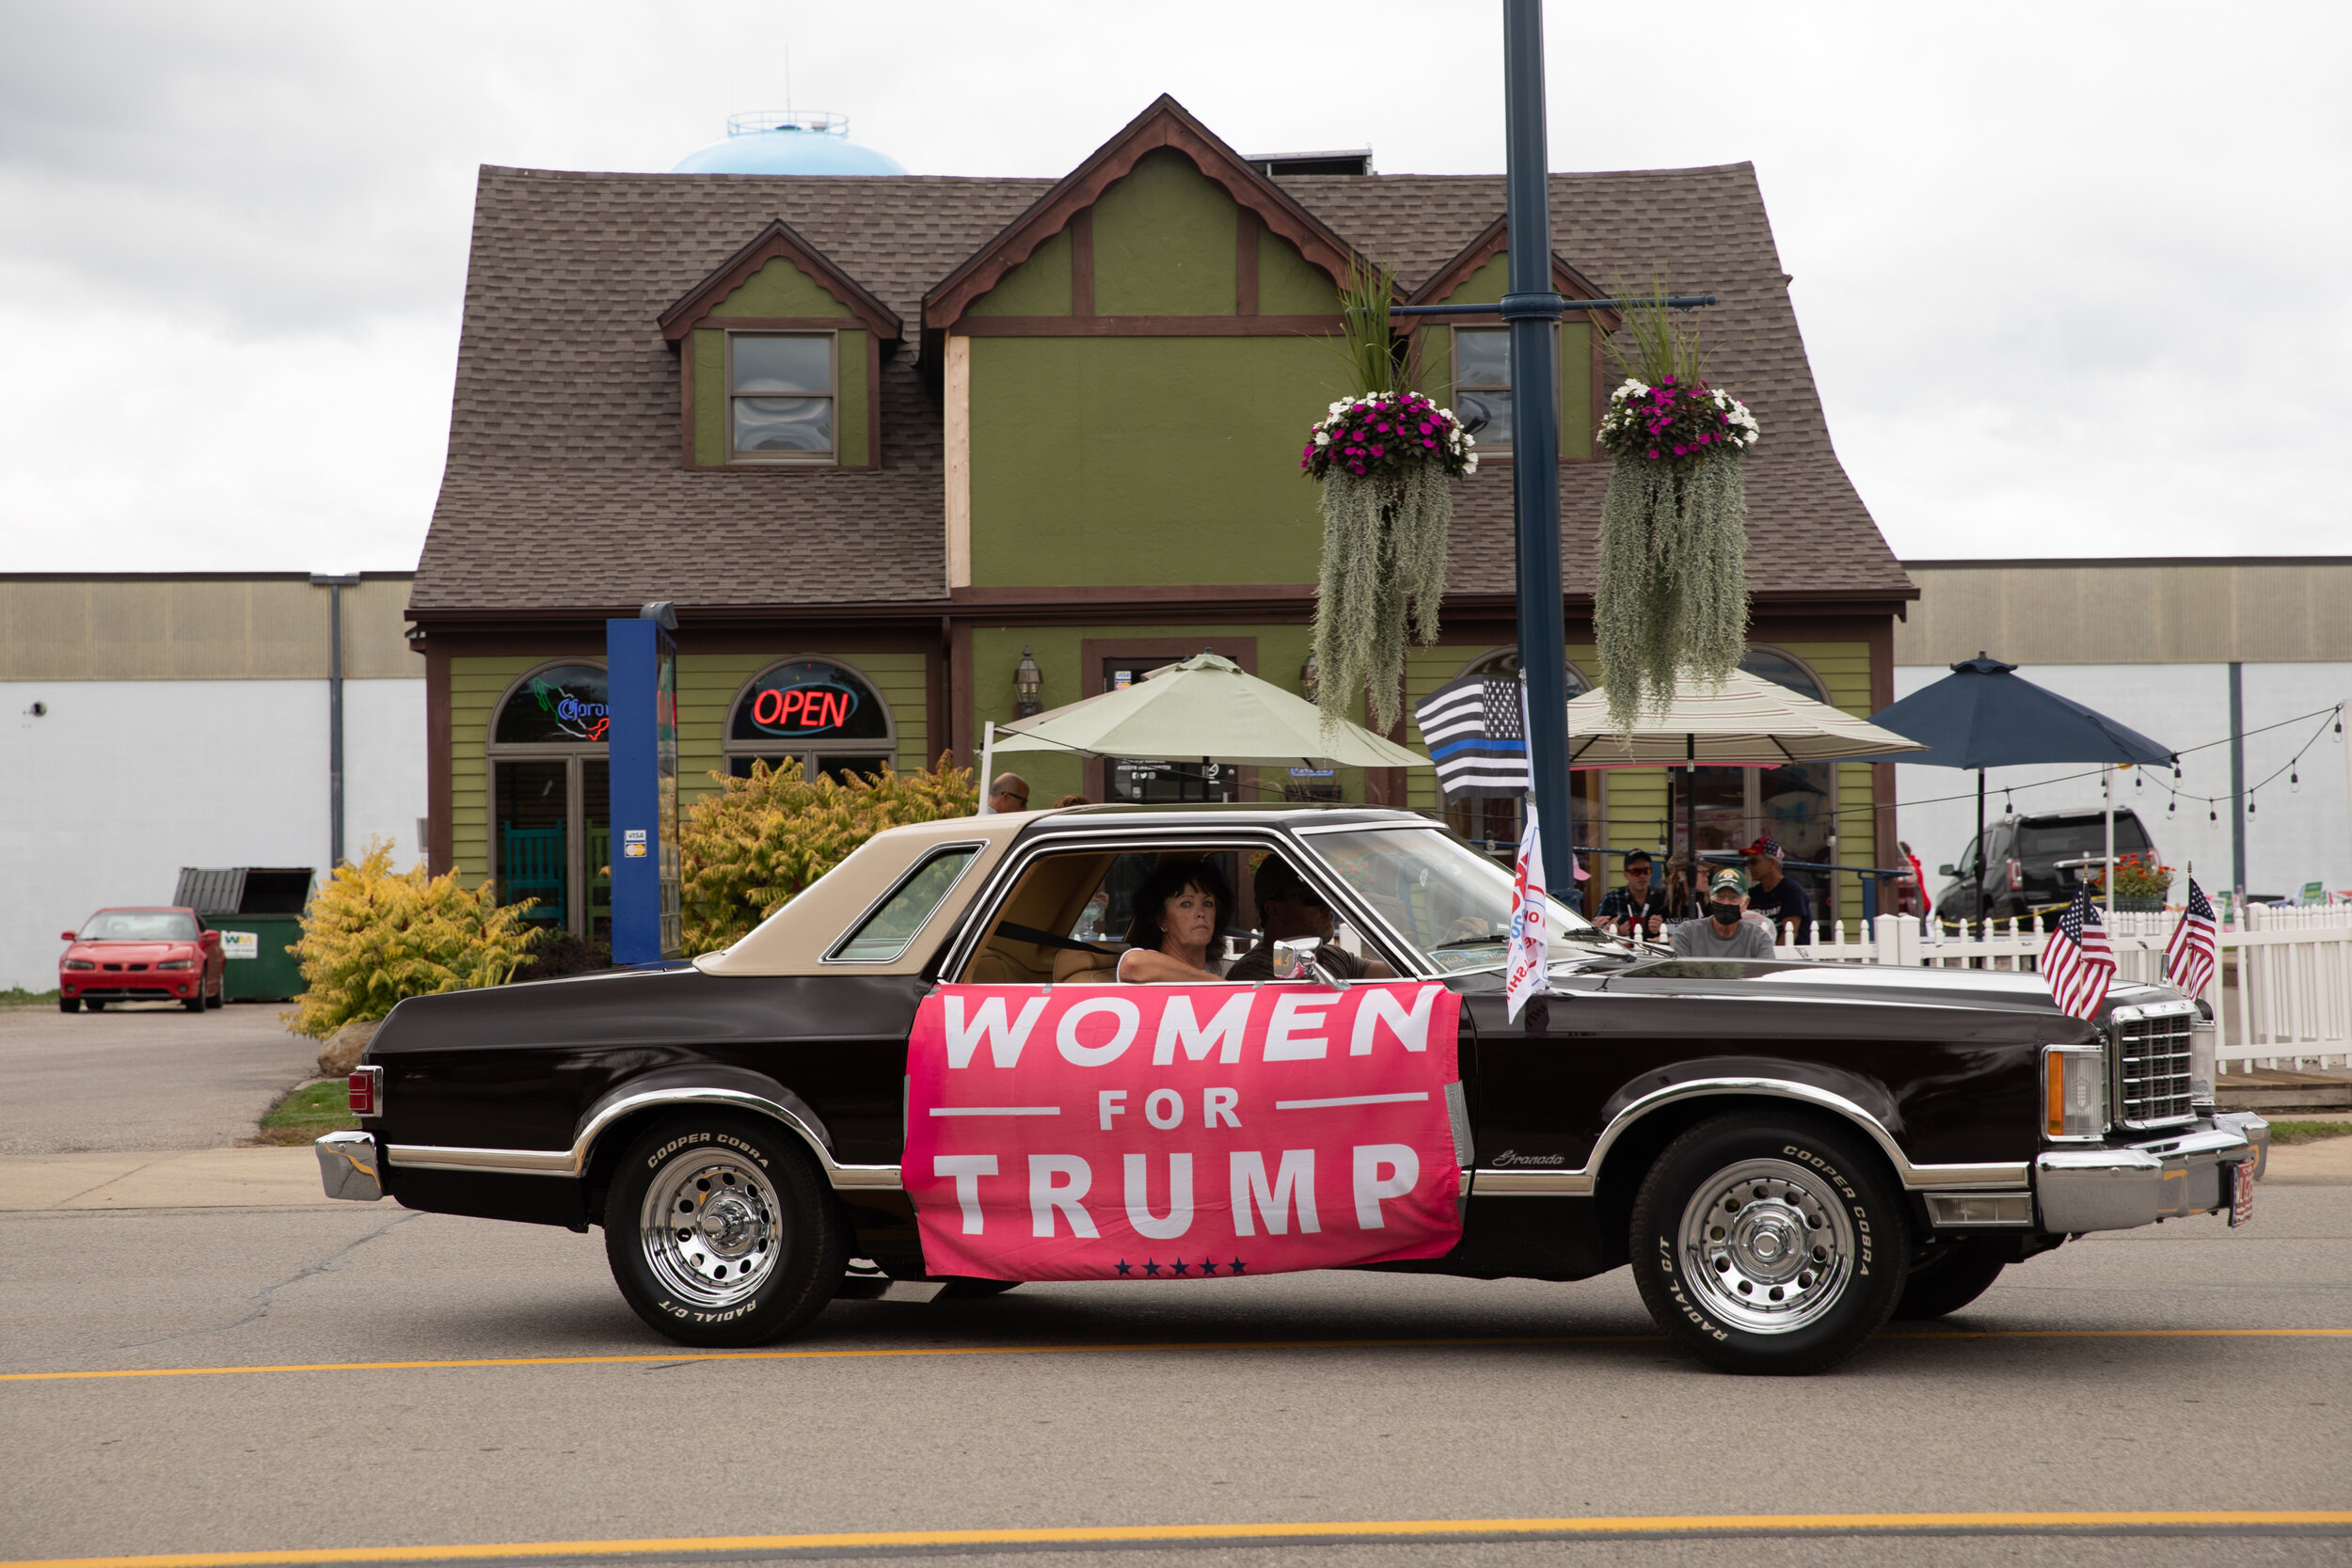  People take part in a classic car cruise in support of U.S. President Donald Trump and law enforcement in Frankenmuth, Michigan, U.S., September 13, 2020. (For Reuters) 